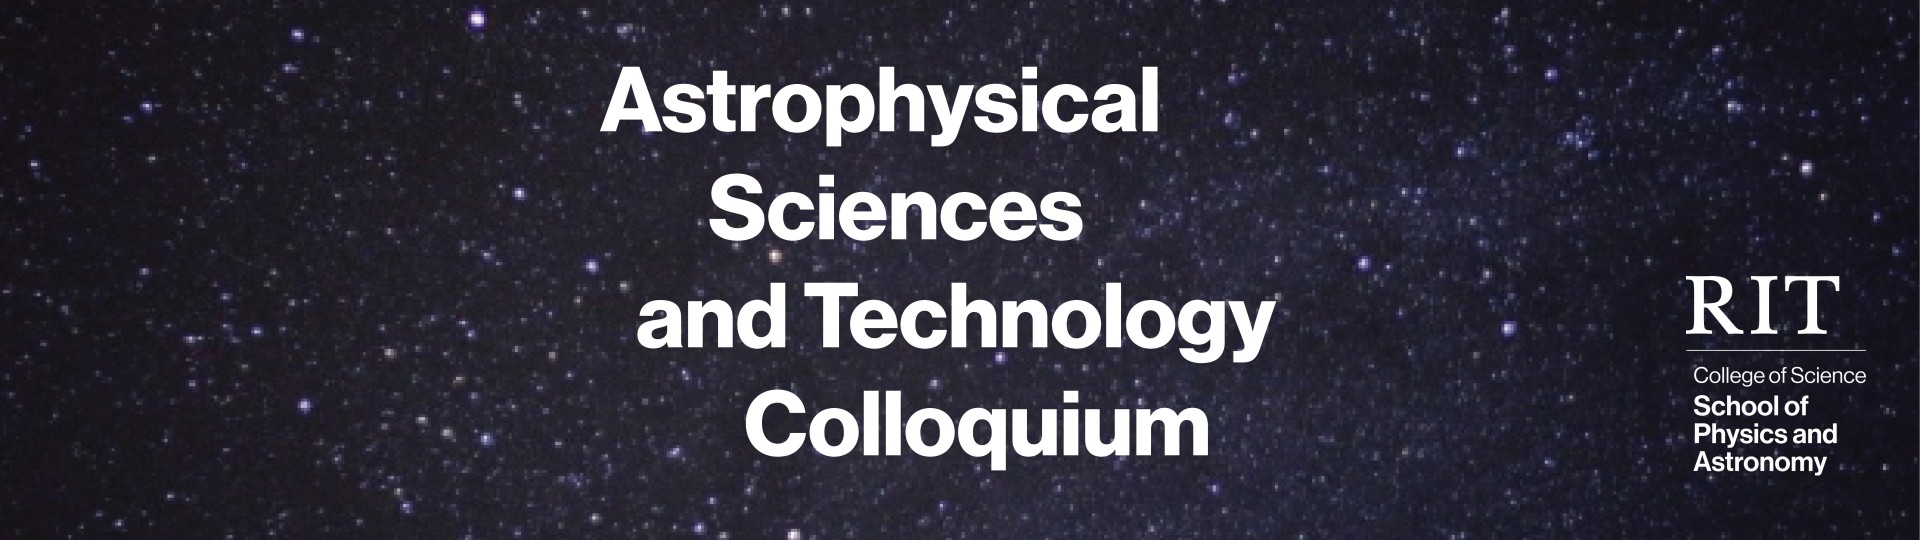 Astrophysical Sciences and Technology Colloquium